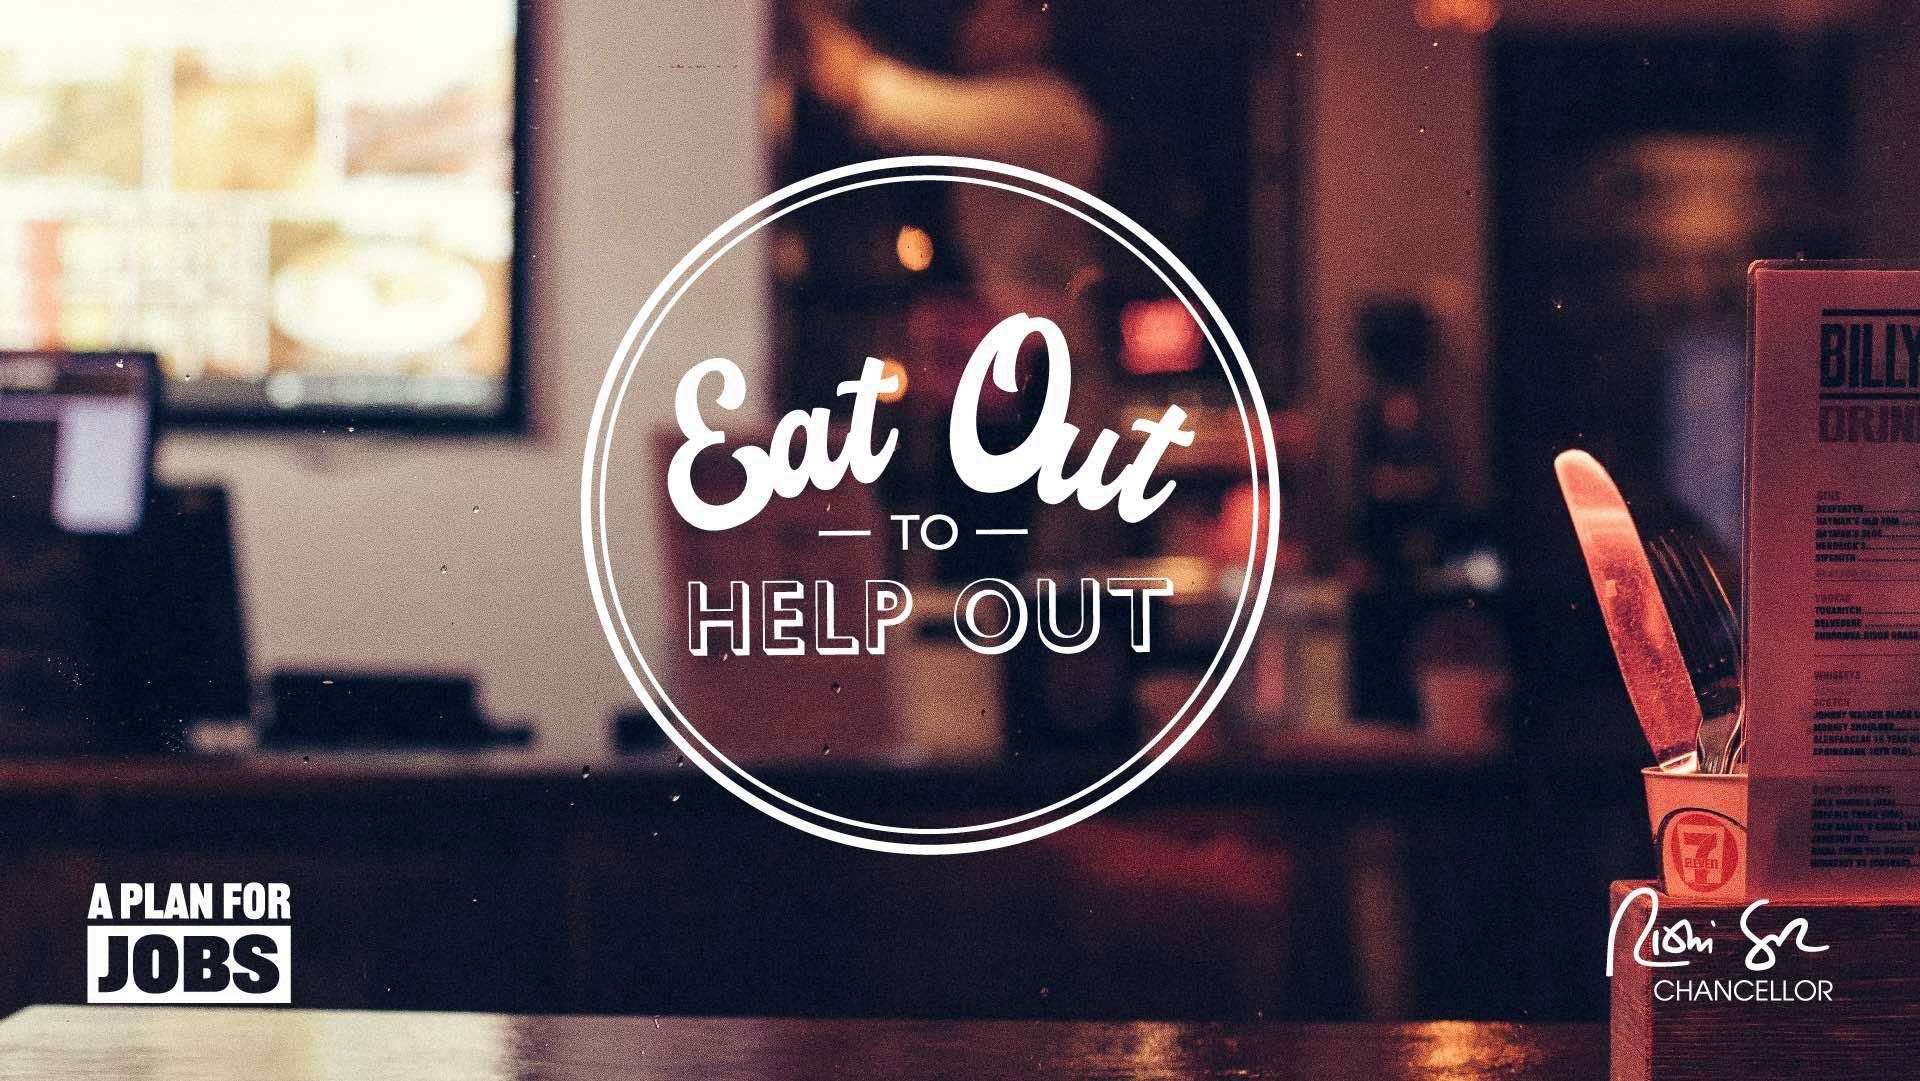 The Eat Out To Help Out scheme is starting on Monday, August 3.